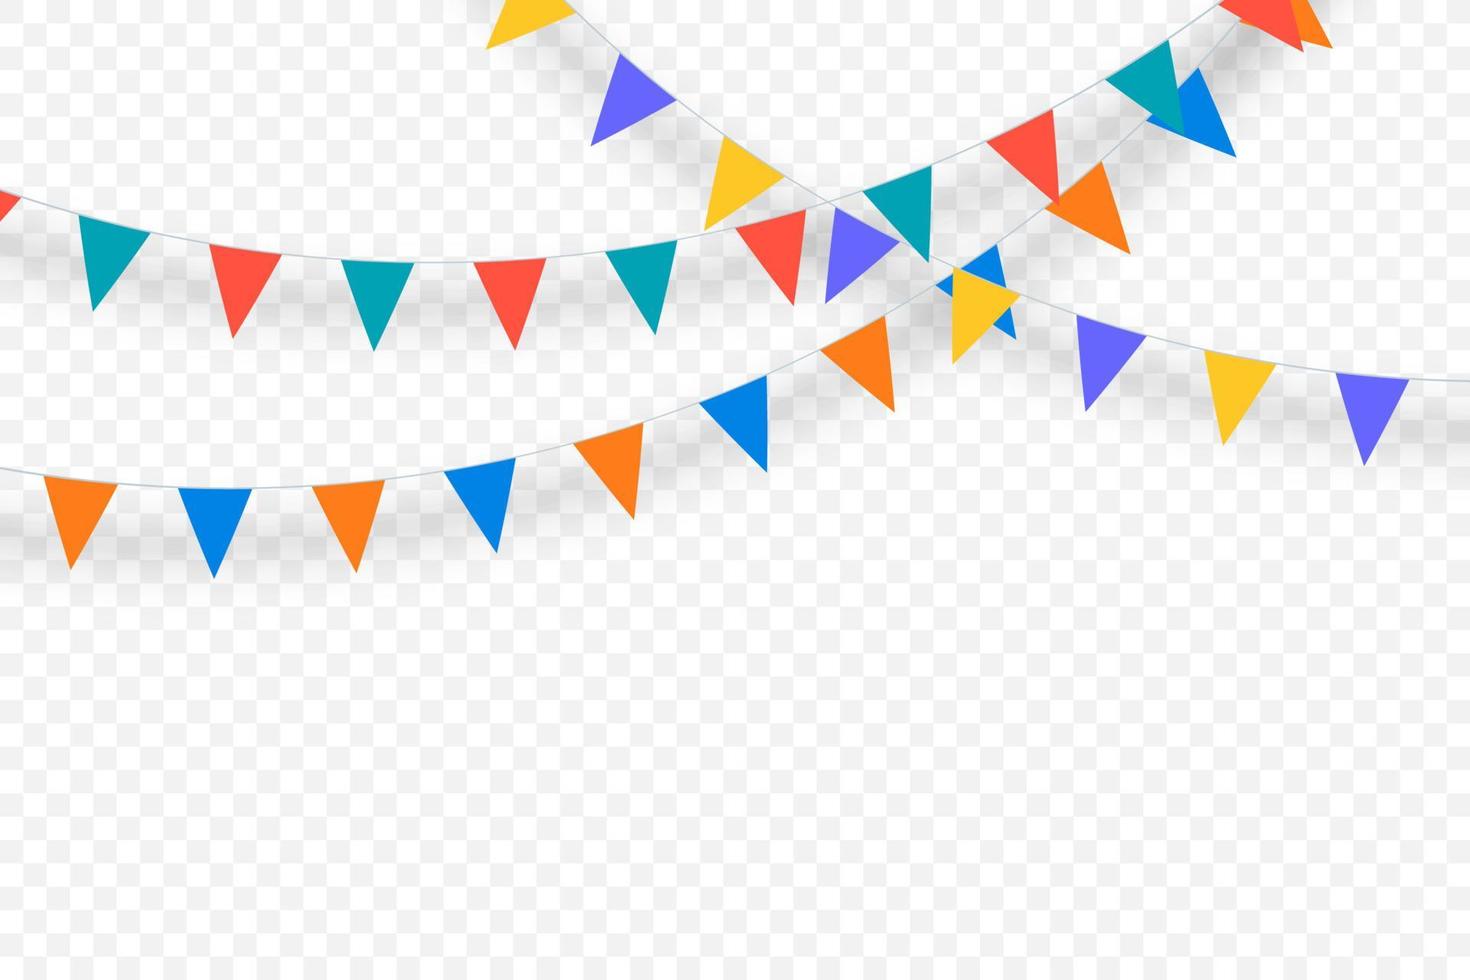 Celebrate party multi colors flags isolate for graphics design. Vector illustration